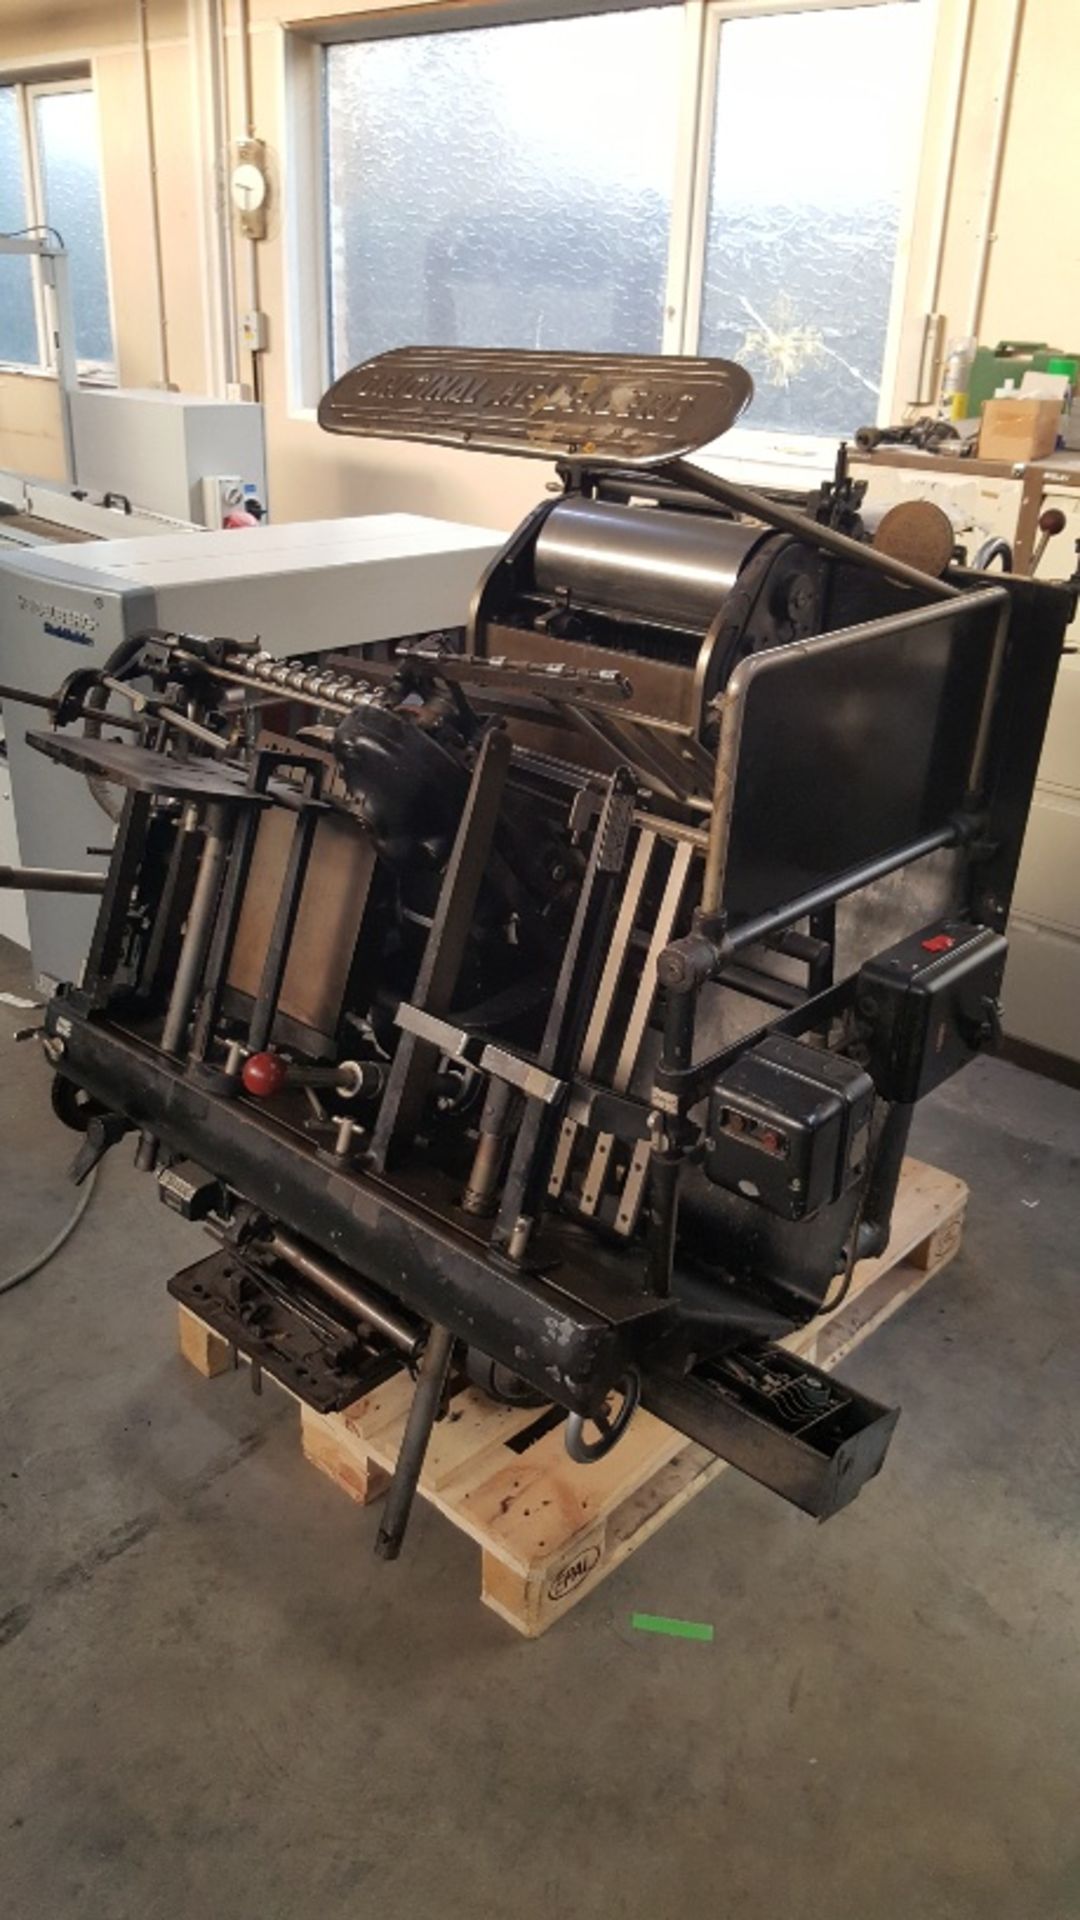 Heidelberg T PLATEN PRESS, serial no. T134513E, year of manufacture 1961, red handle model with lock